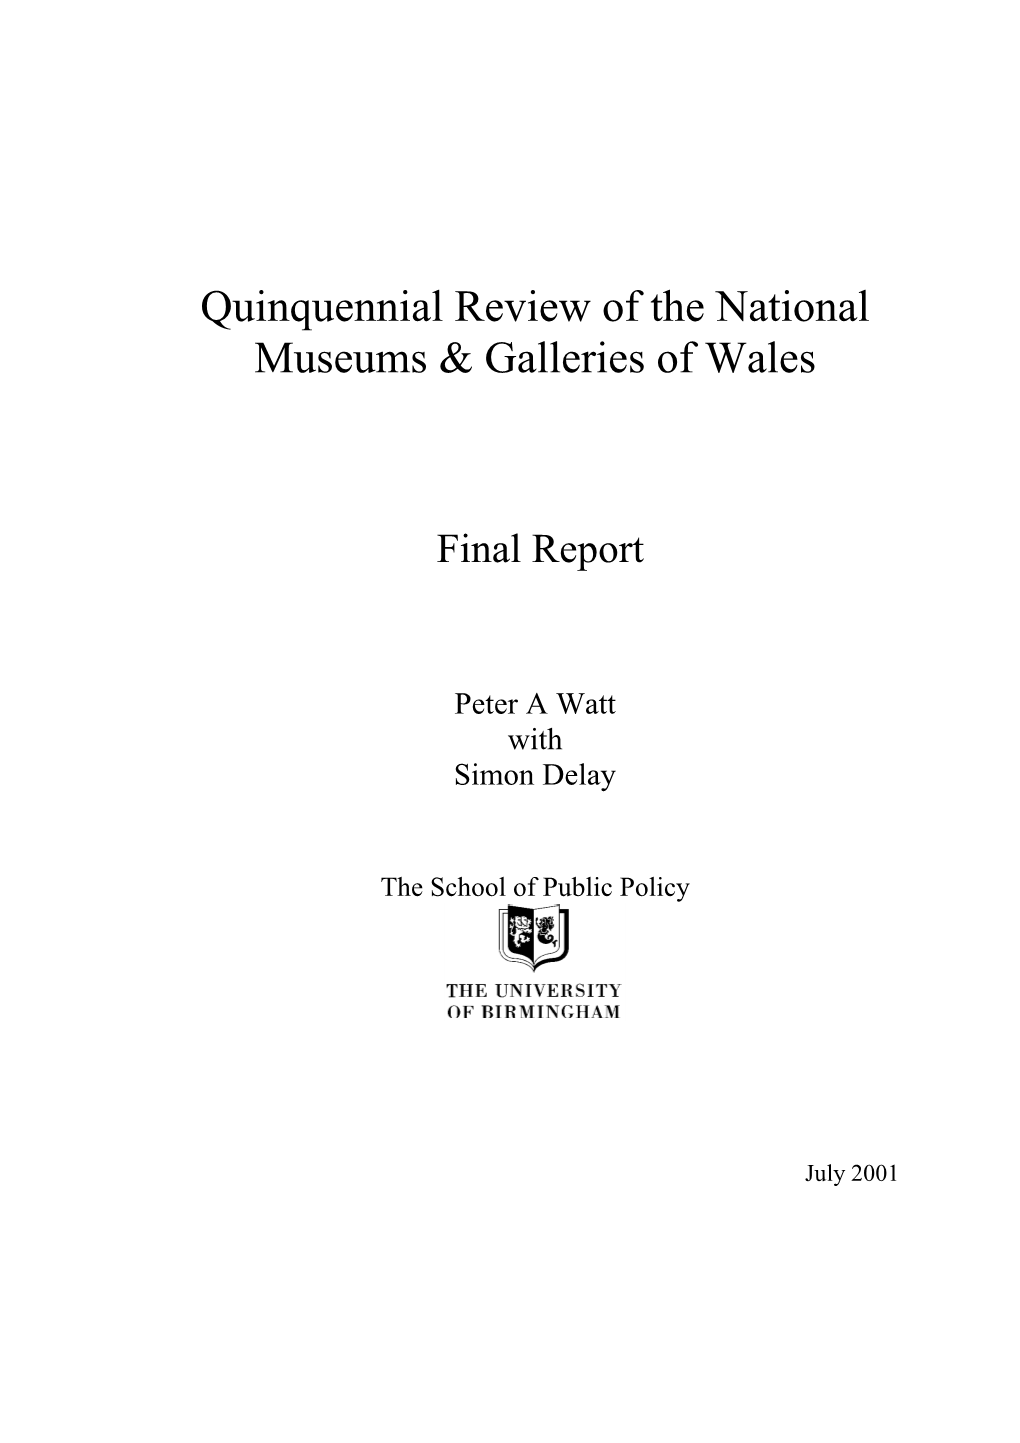 Quinquennial Review of the National Museums & Galleries of Wales